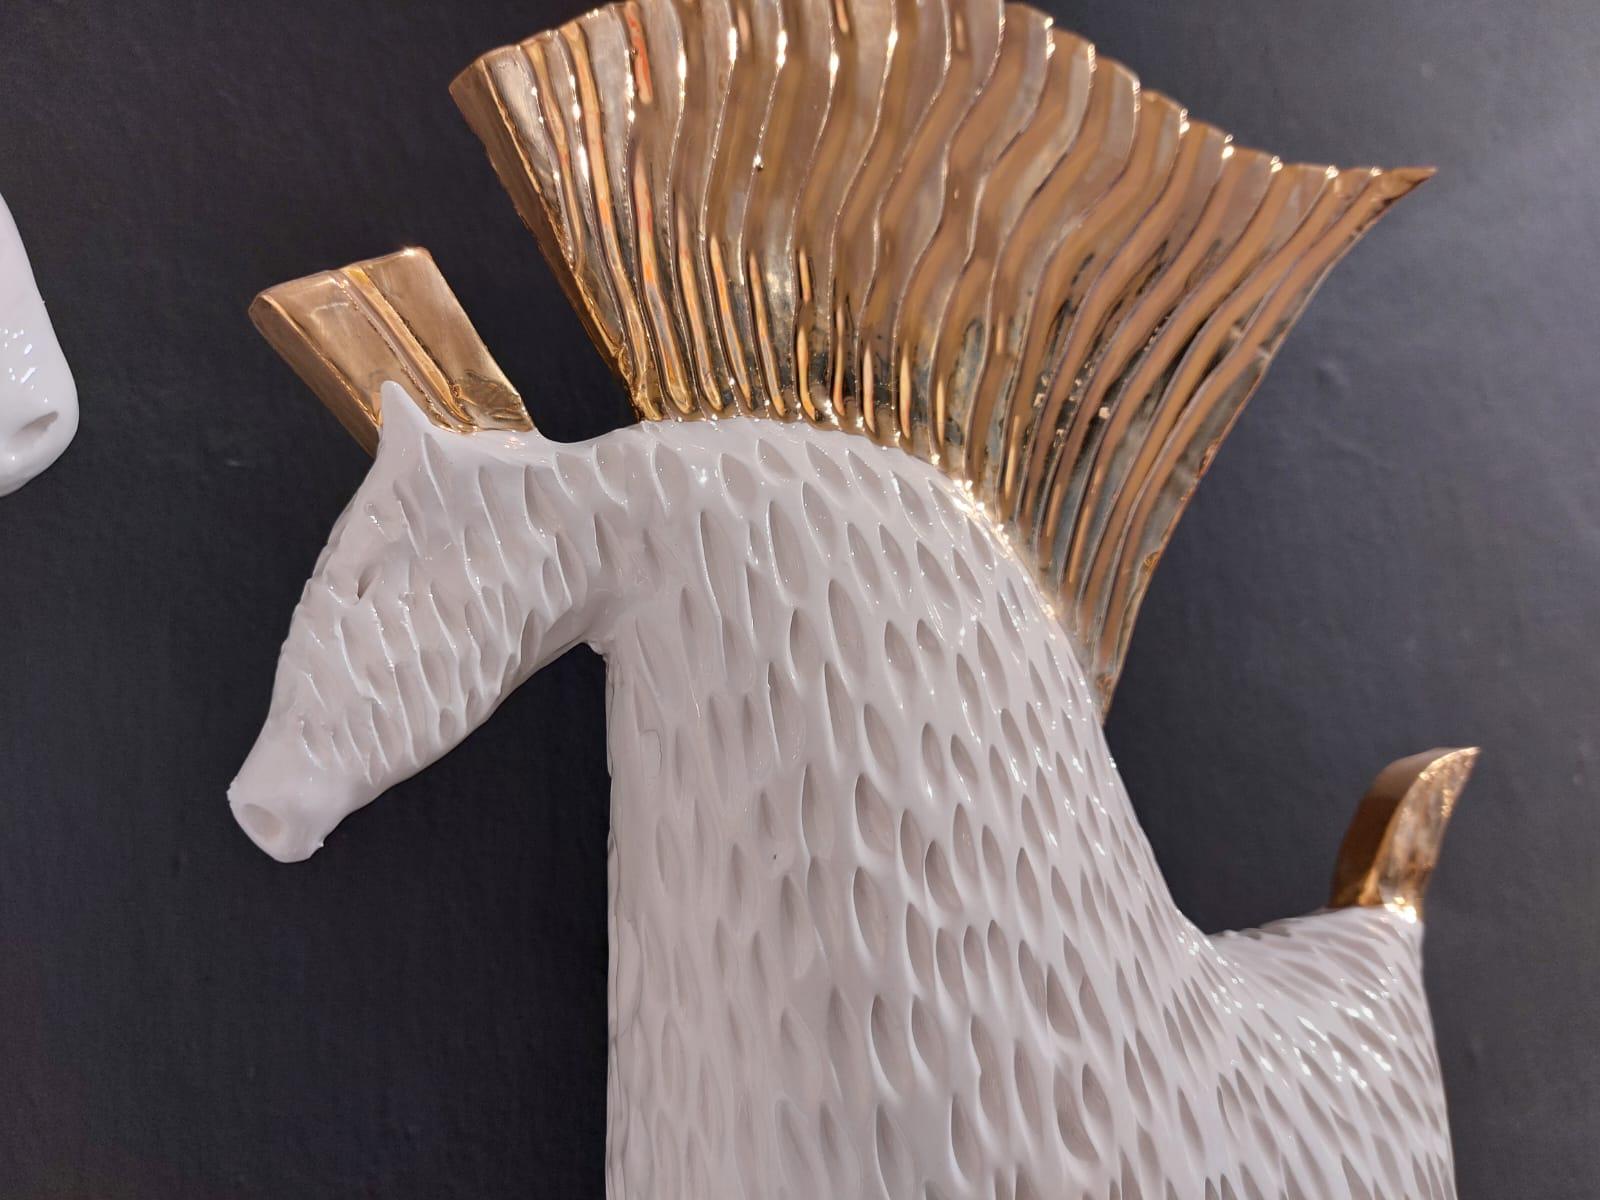 The piece is a unique representation of two horses in a modern way. The horses are gently finished with golden leaf.
Our designer creates these pieces completely by hand, without any mold. Any piece is different and created by the sapient hands of